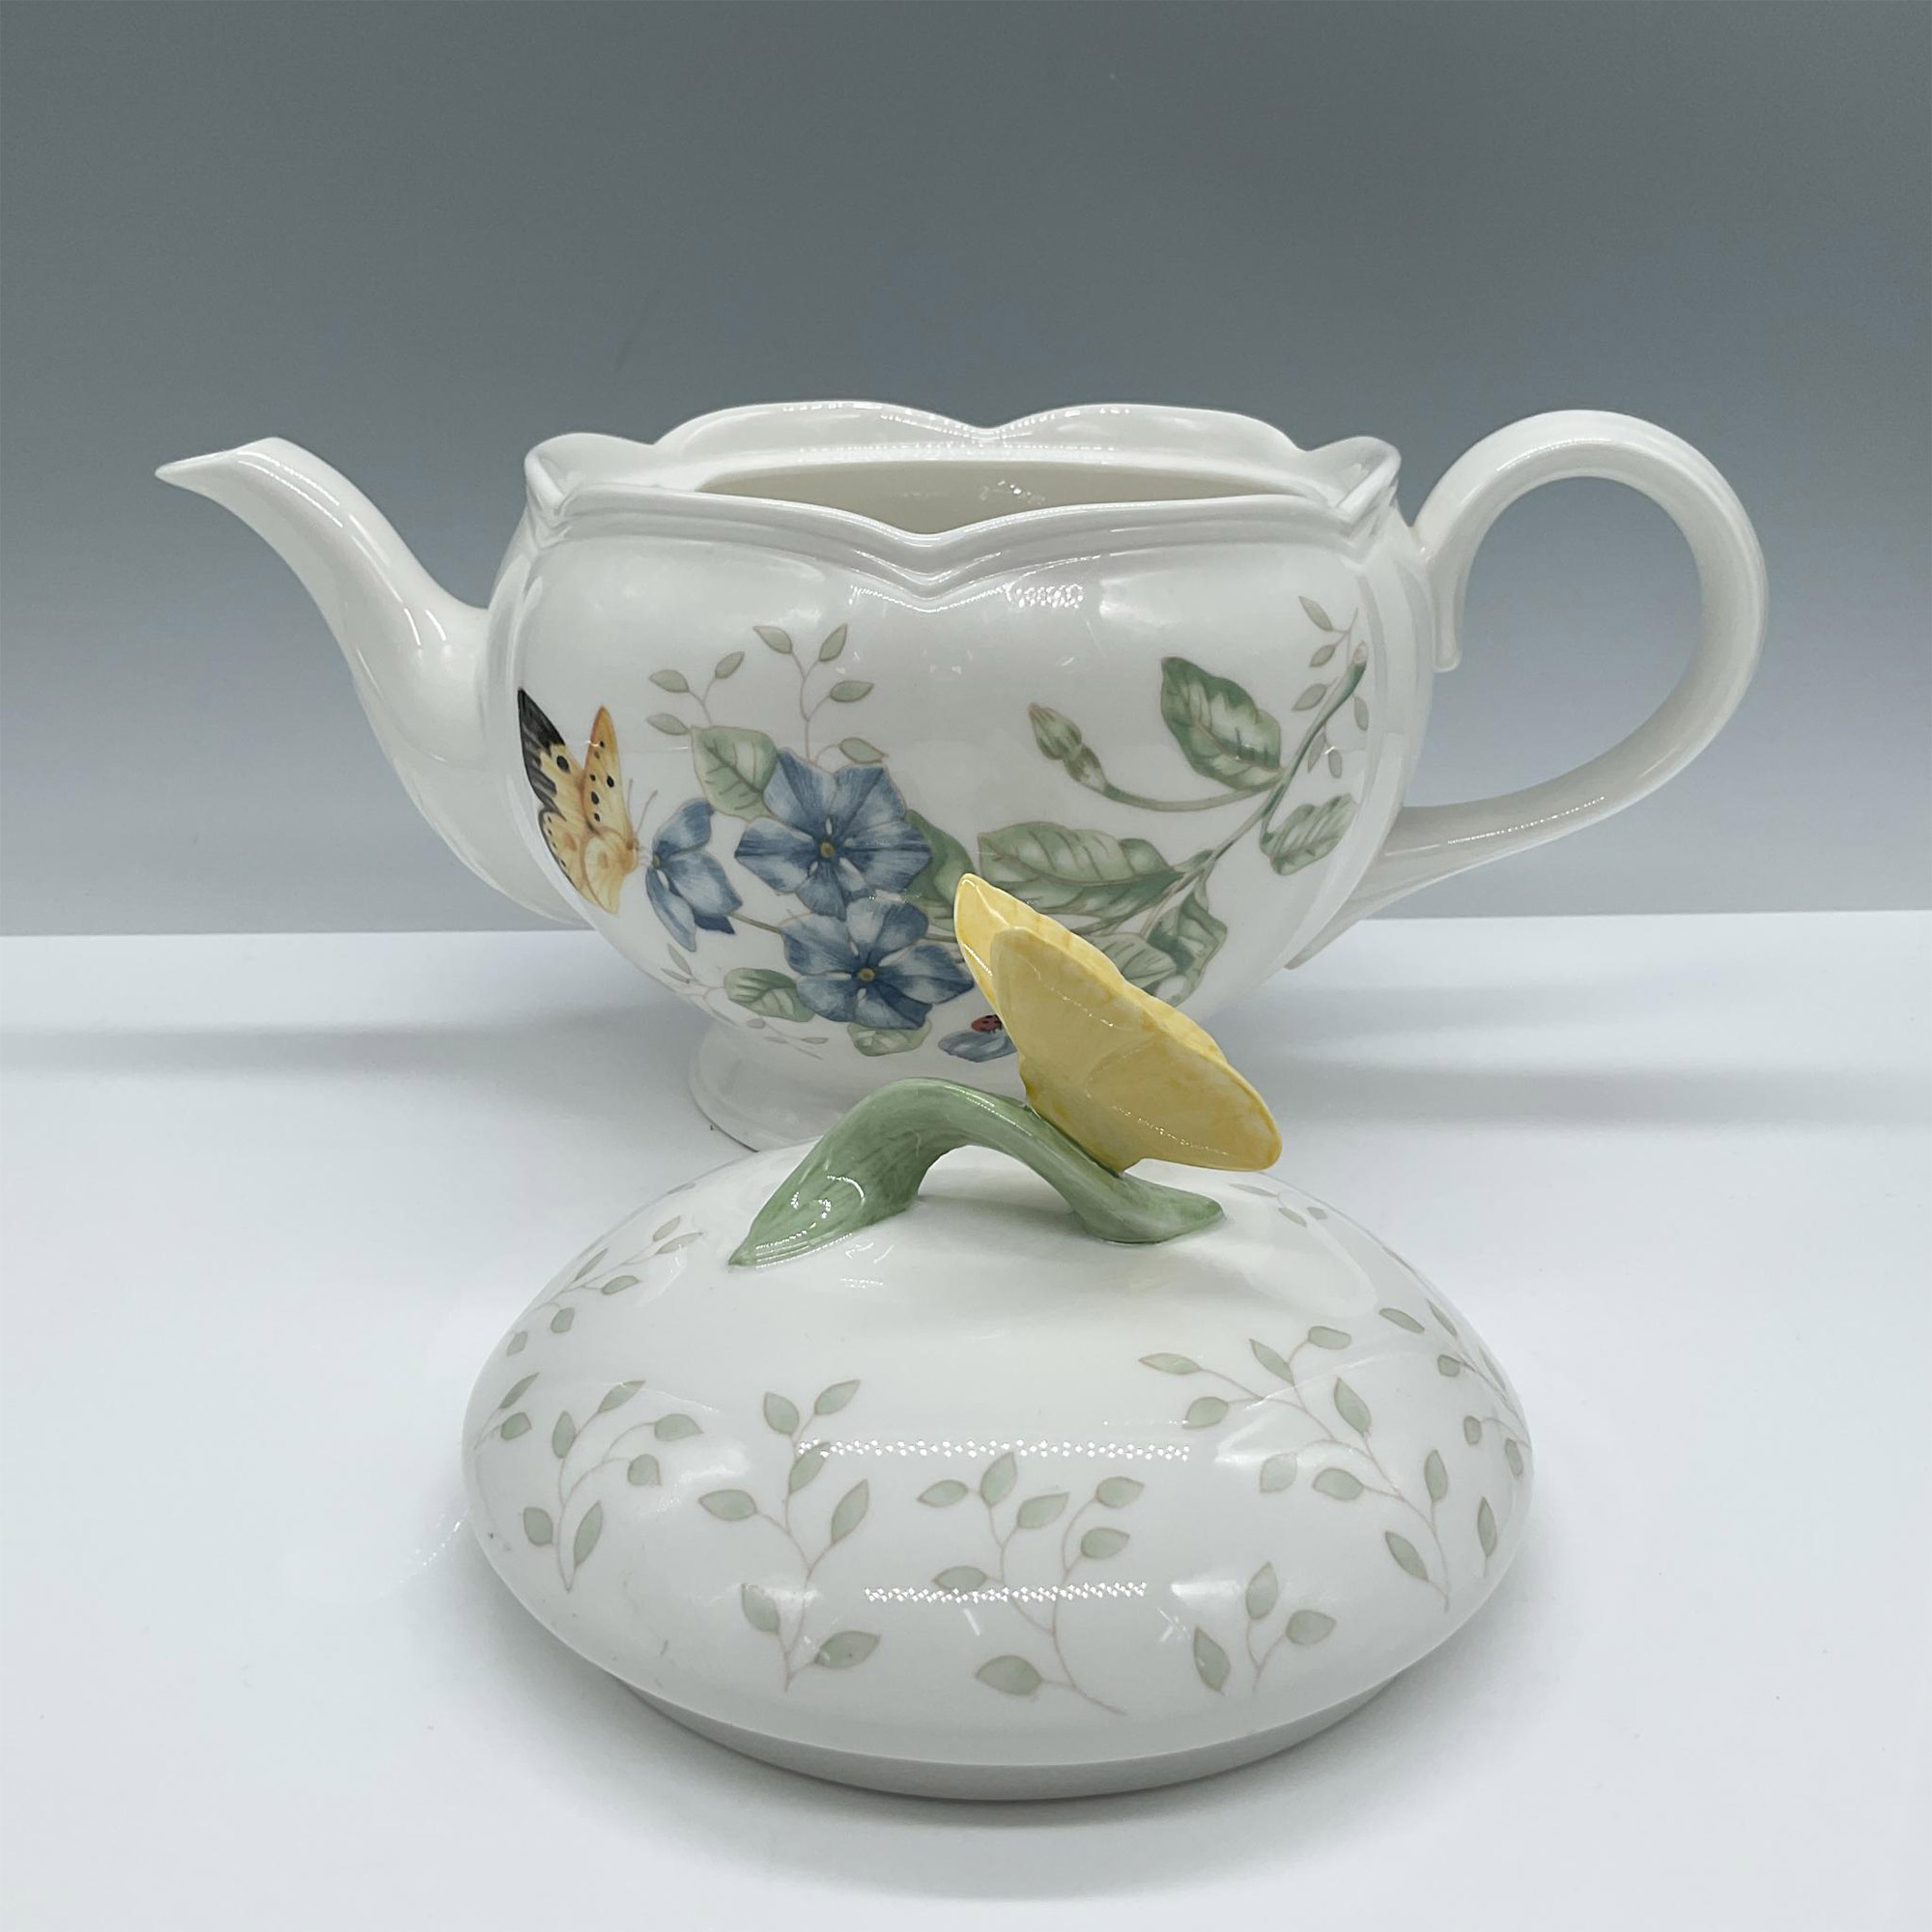 Lenox Porcelain Lidded Tea Pot, Butterfly Meadow Collection - Image 3 of 4